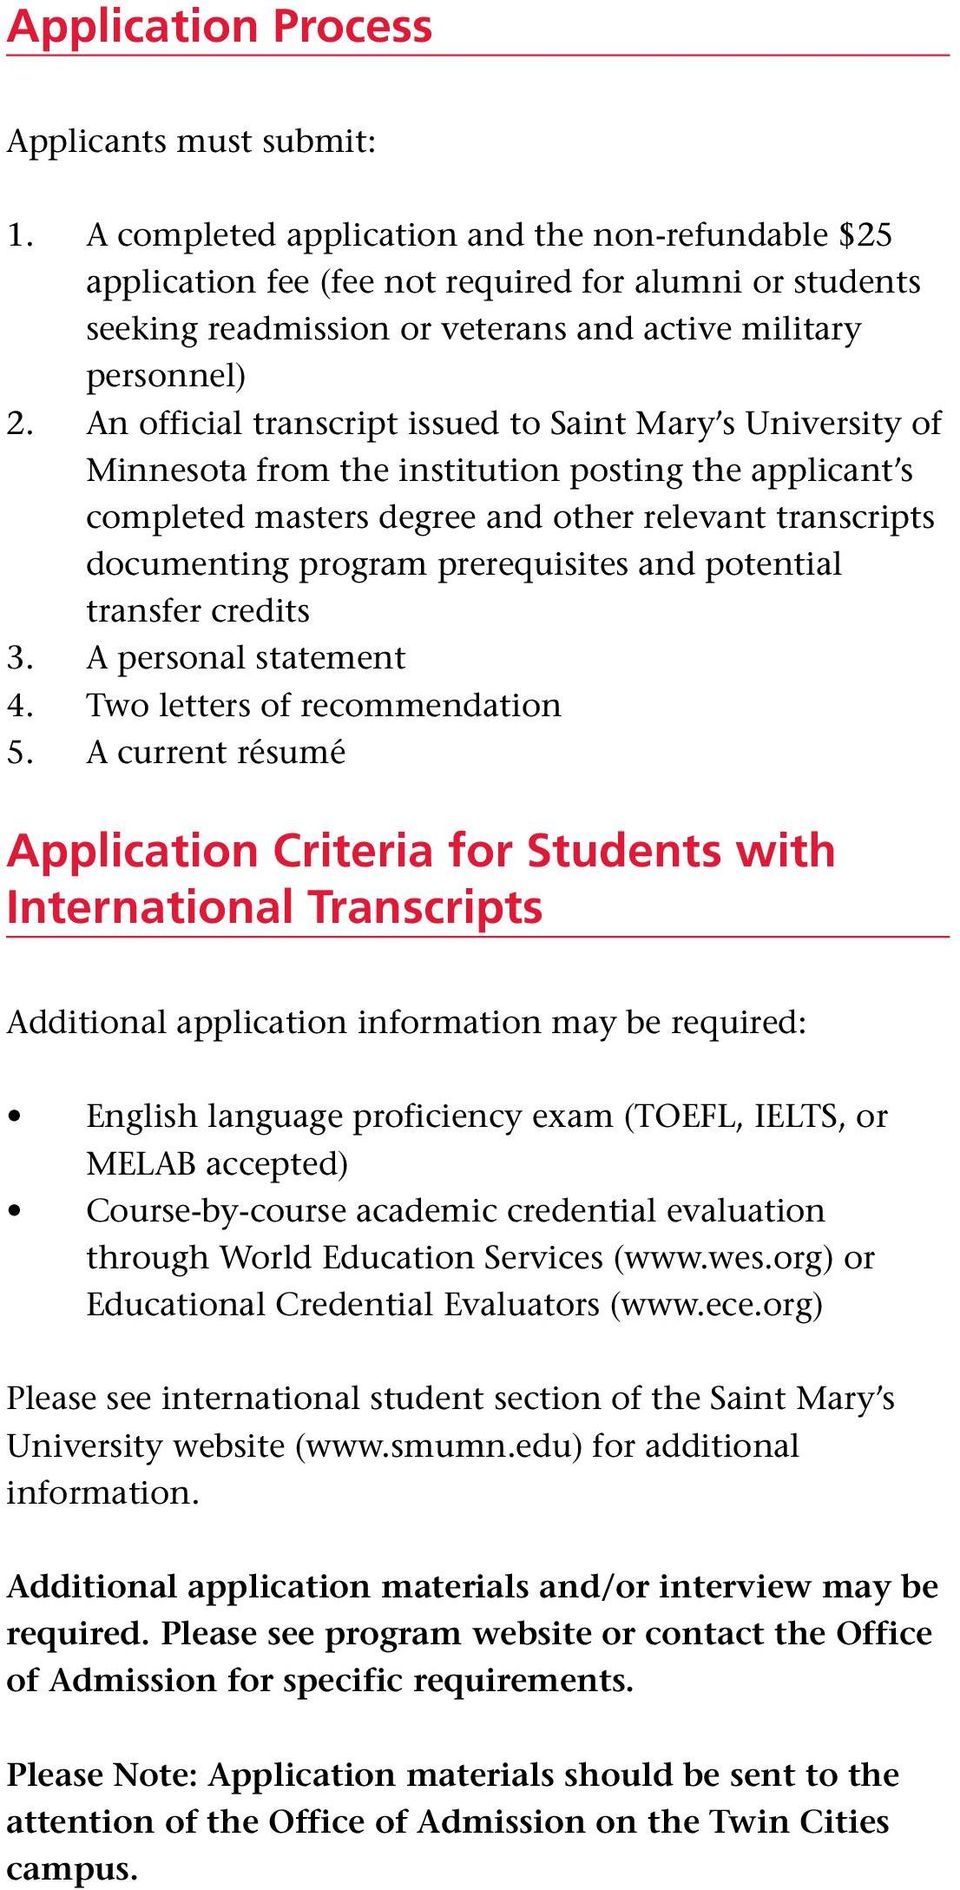 An official transcript issued to Saint Mary s University of Minnesota from the institution posting the applicant s completed masters degree and other relevant transcripts documenting program